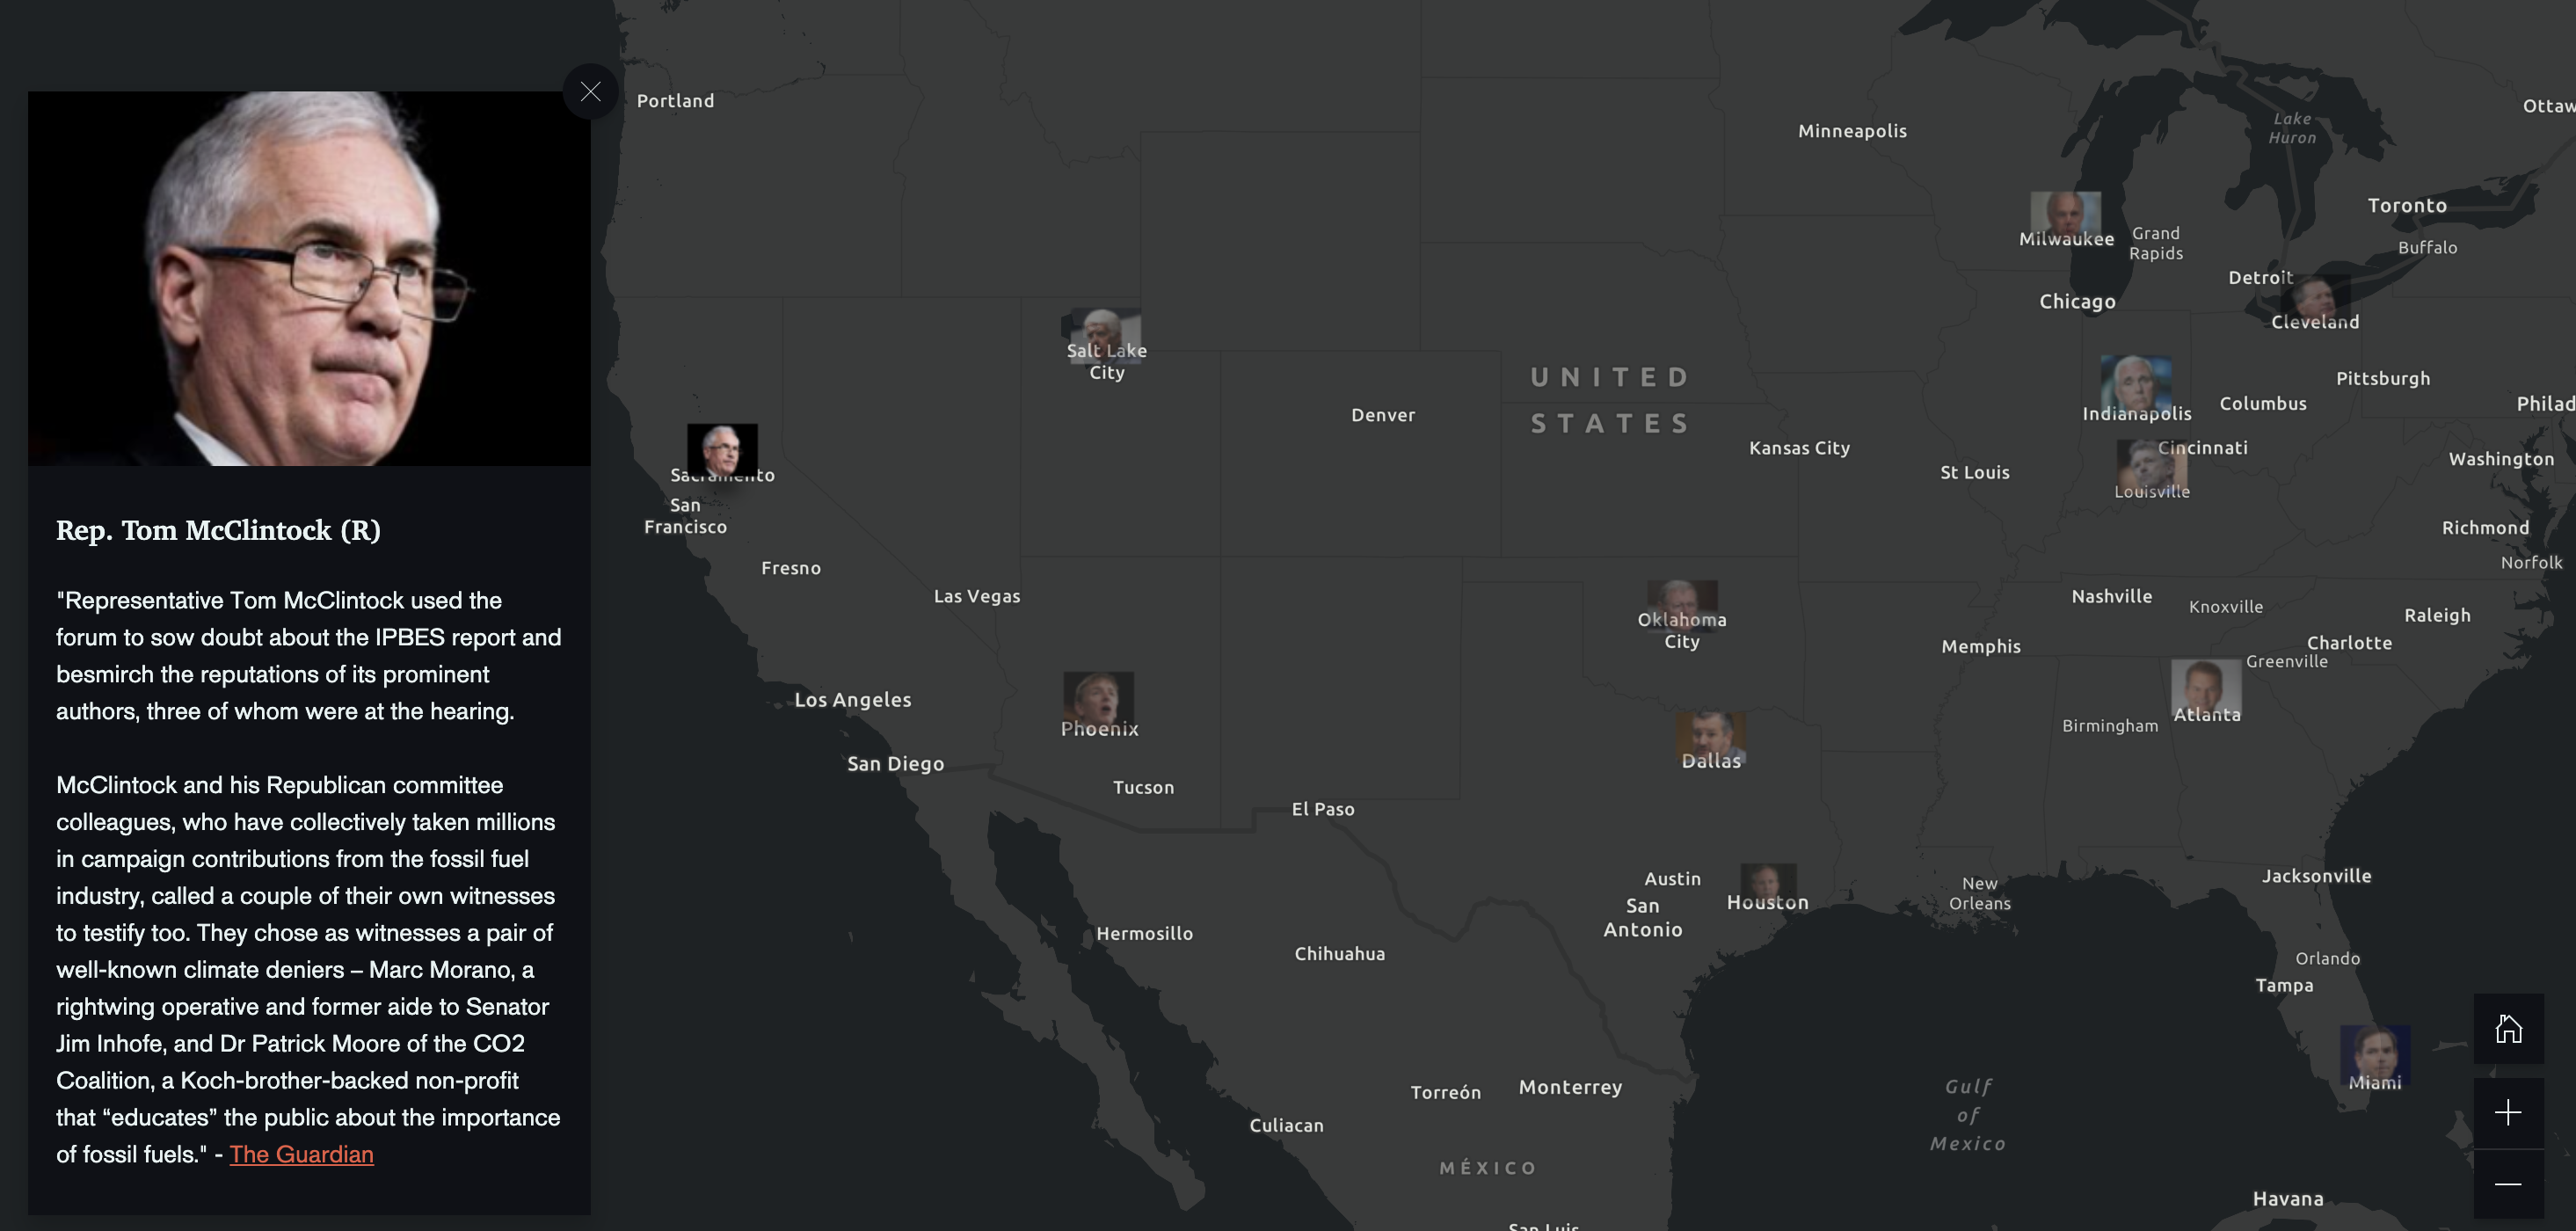 The StoryMaps shows the elected official for every congressional district and state. Some of the more extreme climate deniers like Rob Bishop (Utah), Paul Gosar (Arizona) and Tom McClintock (CA) and their public statements are highlighted.